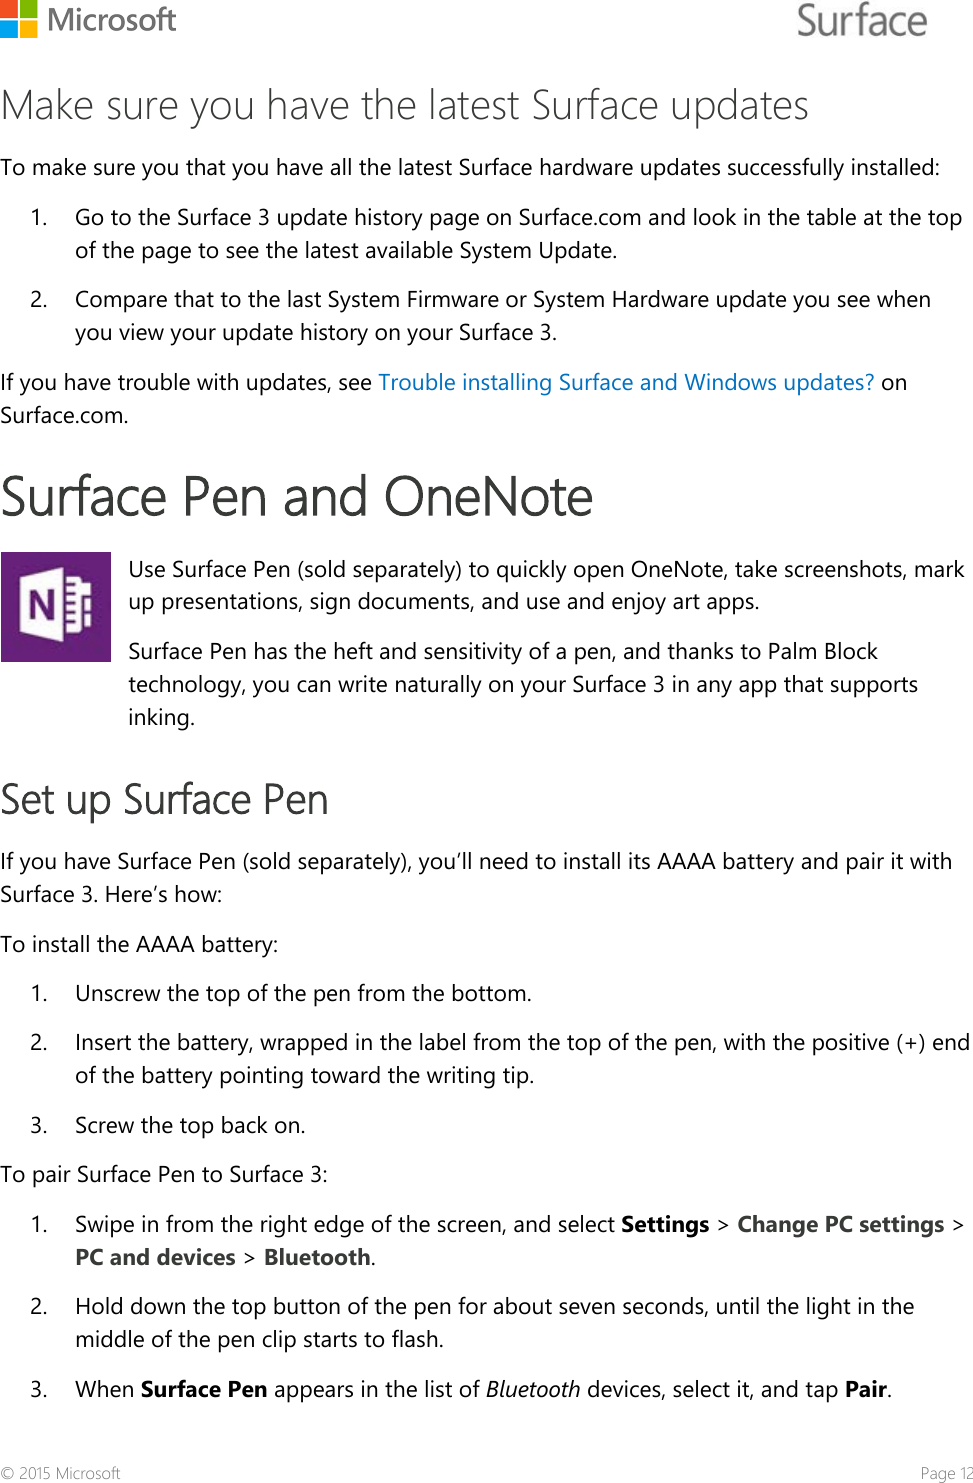    Make sure you have the latest Surface updates To make sure you that you have all the latest Surface hardware updates successfully installed: 1. Go to the Surface 3 update history page on Surface.com and look in the table at the top of the page to see the latest available System Update.  2. Compare that to the last System Firmware or System Hardware update you see when you view your update history on your Surface 3. If you have trouble with updates, see Trouble installing Surface and Windows updates? on Surface.com. Surface Pen and OneNote   Use Surface Pen (sold separately) to quickly open OneNote, take screenshots, mark up presentations, sign documents, and use and enjoy art apps.  Surface Pen has the heft and sensitivity of a pen, and thanks to Palm Block technology, you can write naturally on your Surface 3 in any app that supports inking. Set up Surface Pen If you have Surface Pen (sold separately), you’ll need to install its AAAA battery and pair it with Surface 3. Here’s how: To install the AAAA battery: 1. Unscrew the top of the pen from the bottom. 2. Insert the battery, wrapped in the label from the top of the pen, with the positive (+) end of the battery pointing toward the writing tip.  3. Screw the top back on. To pair Surface Pen to Surface 3: 1. Swipe in from the right edge of the screen, and select Settings &gt; Change PC settings &gt; PC and devices &gt; Bluetooth.  2. Hold down the top button of the pen for about seven seconds, until the light in the middle of the pen clip starts to flash. 3. When Surface Pen appears in the list of Bluetooth devices, select it, and tap Pair. © 2015 Microsoft    Page 12 